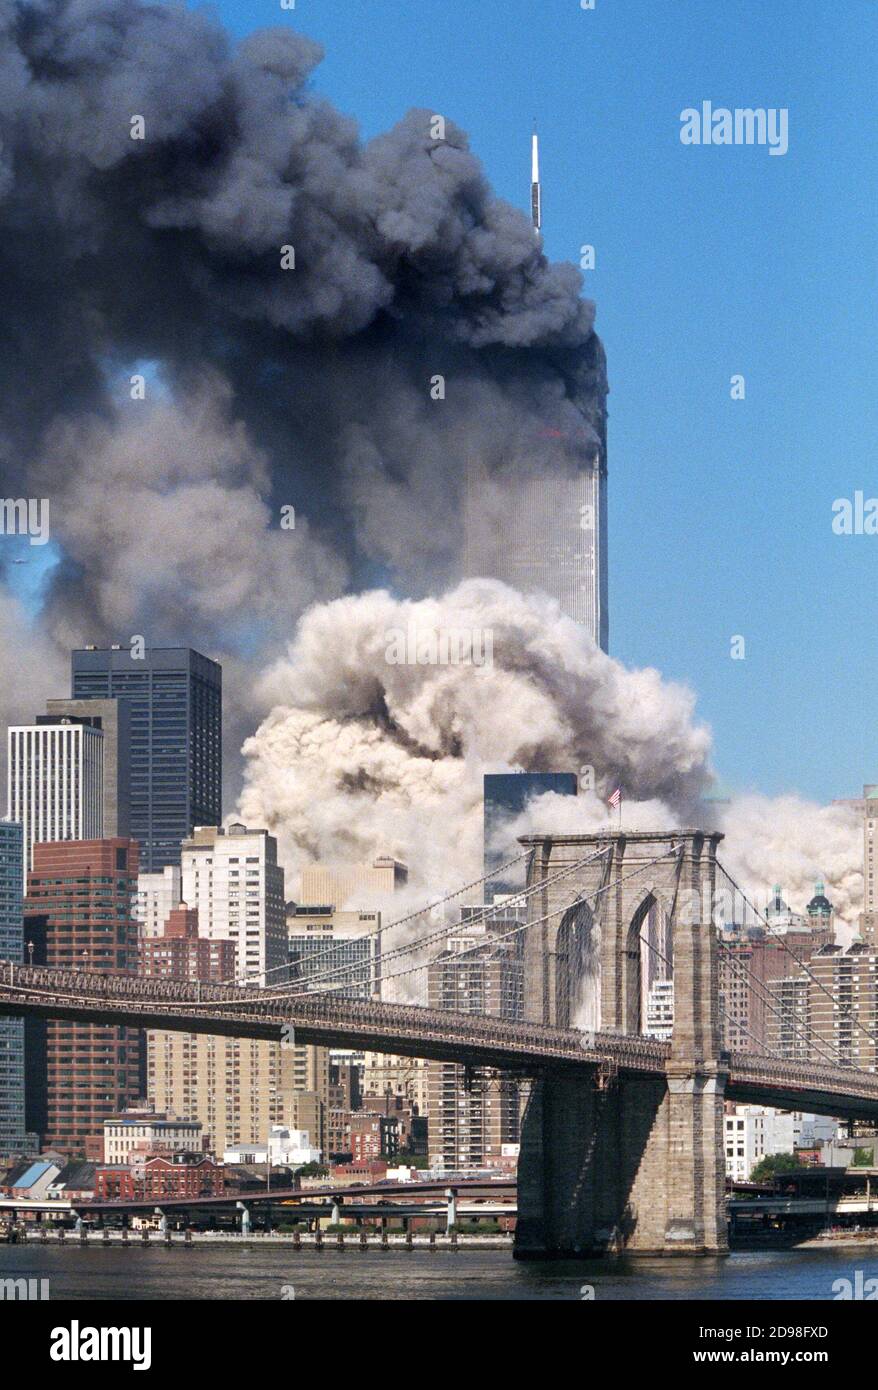 The 110-story South Tower of the World Trade Center collapses on September 11, 2001. Stock Photo